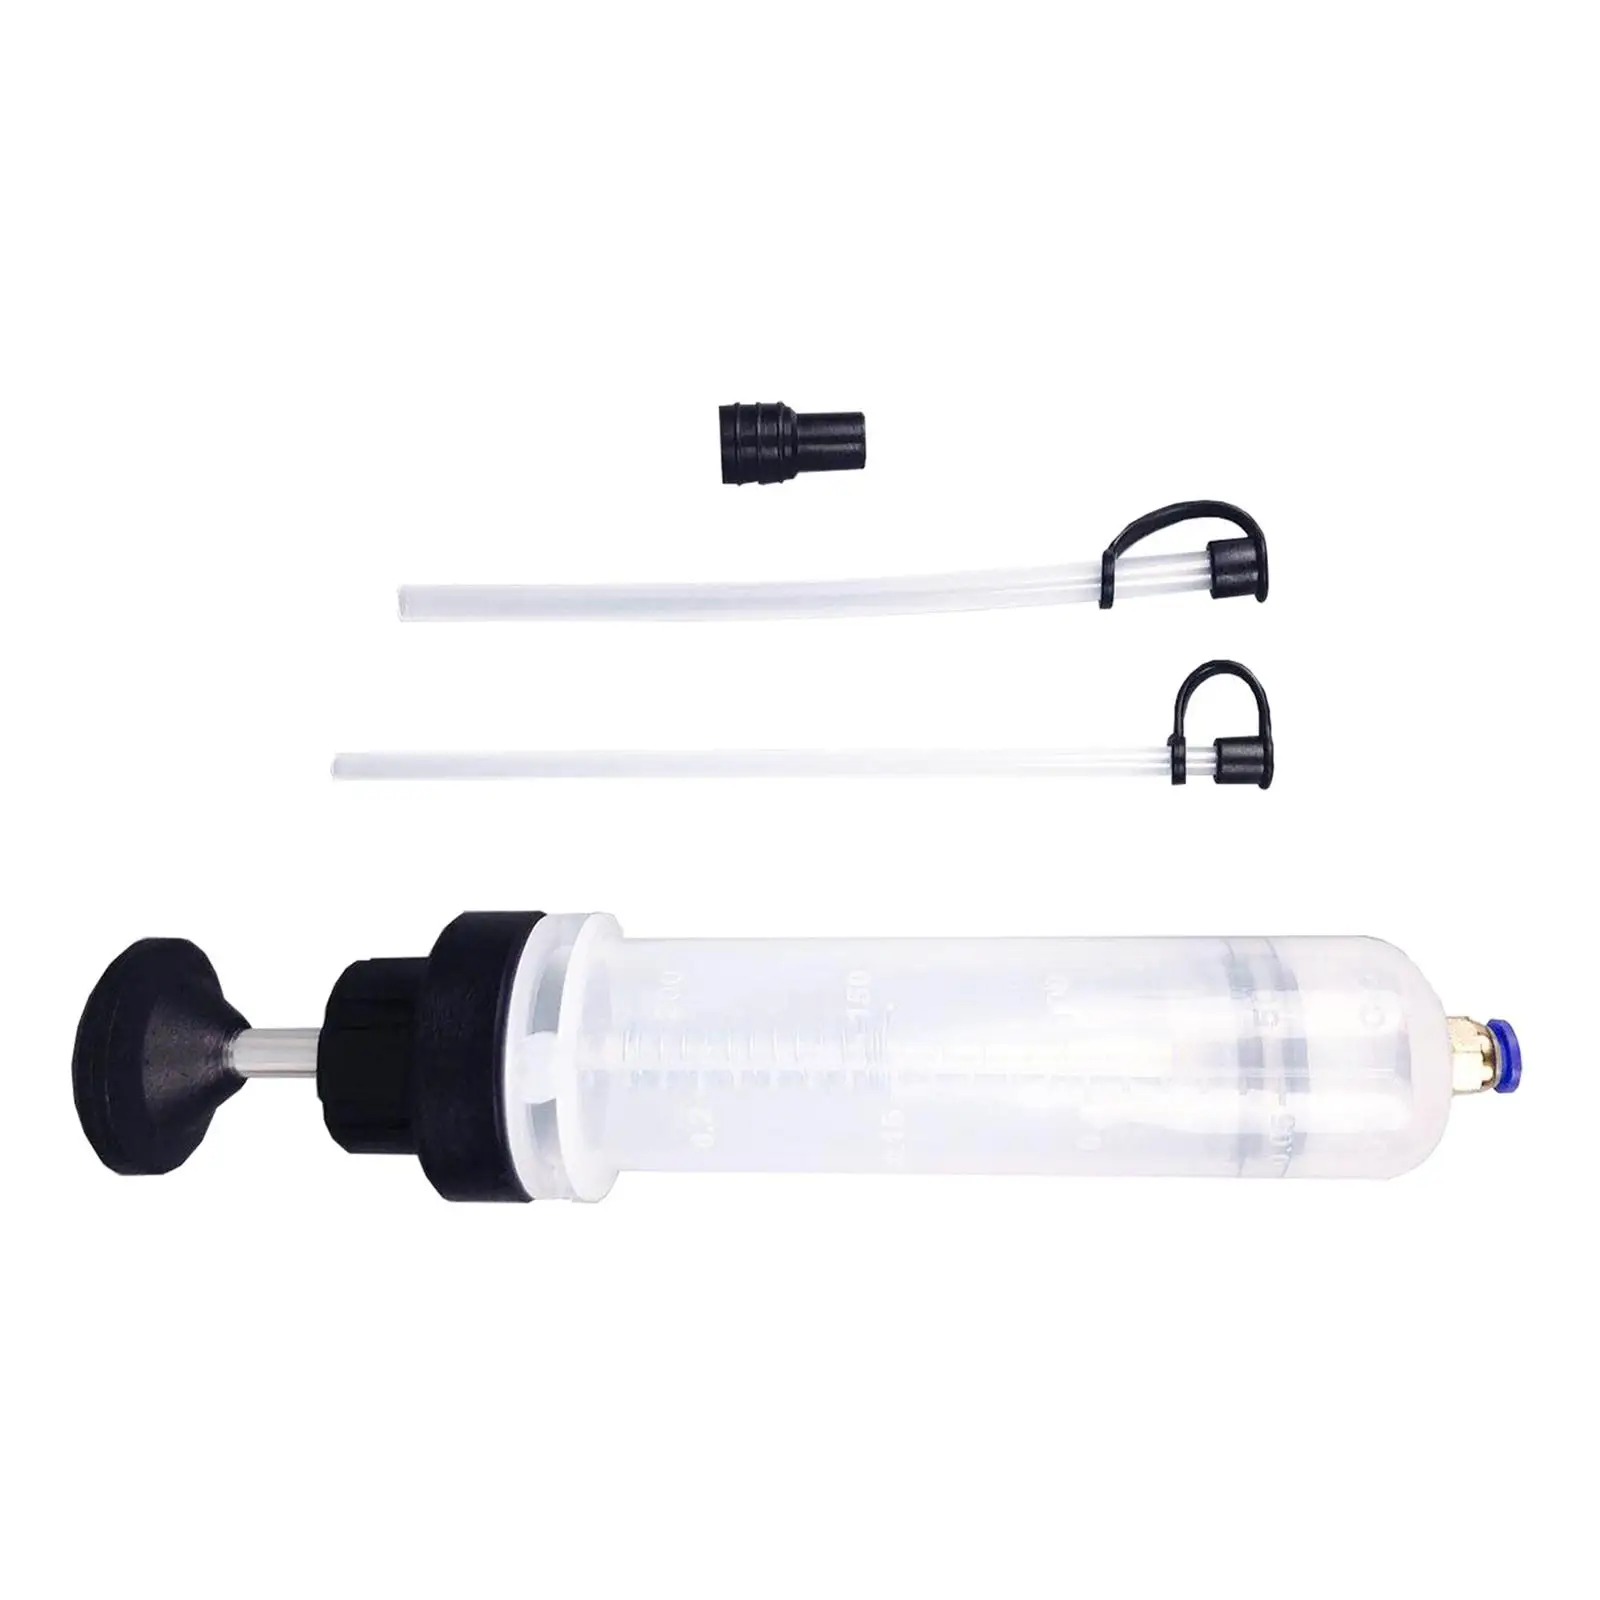 200CC Car Oil Fluid Extractor Oil Filling Syringe Delivery Bottle Transfer Liquid Pump Fluid Extraction Oil Extractor Tool Kit